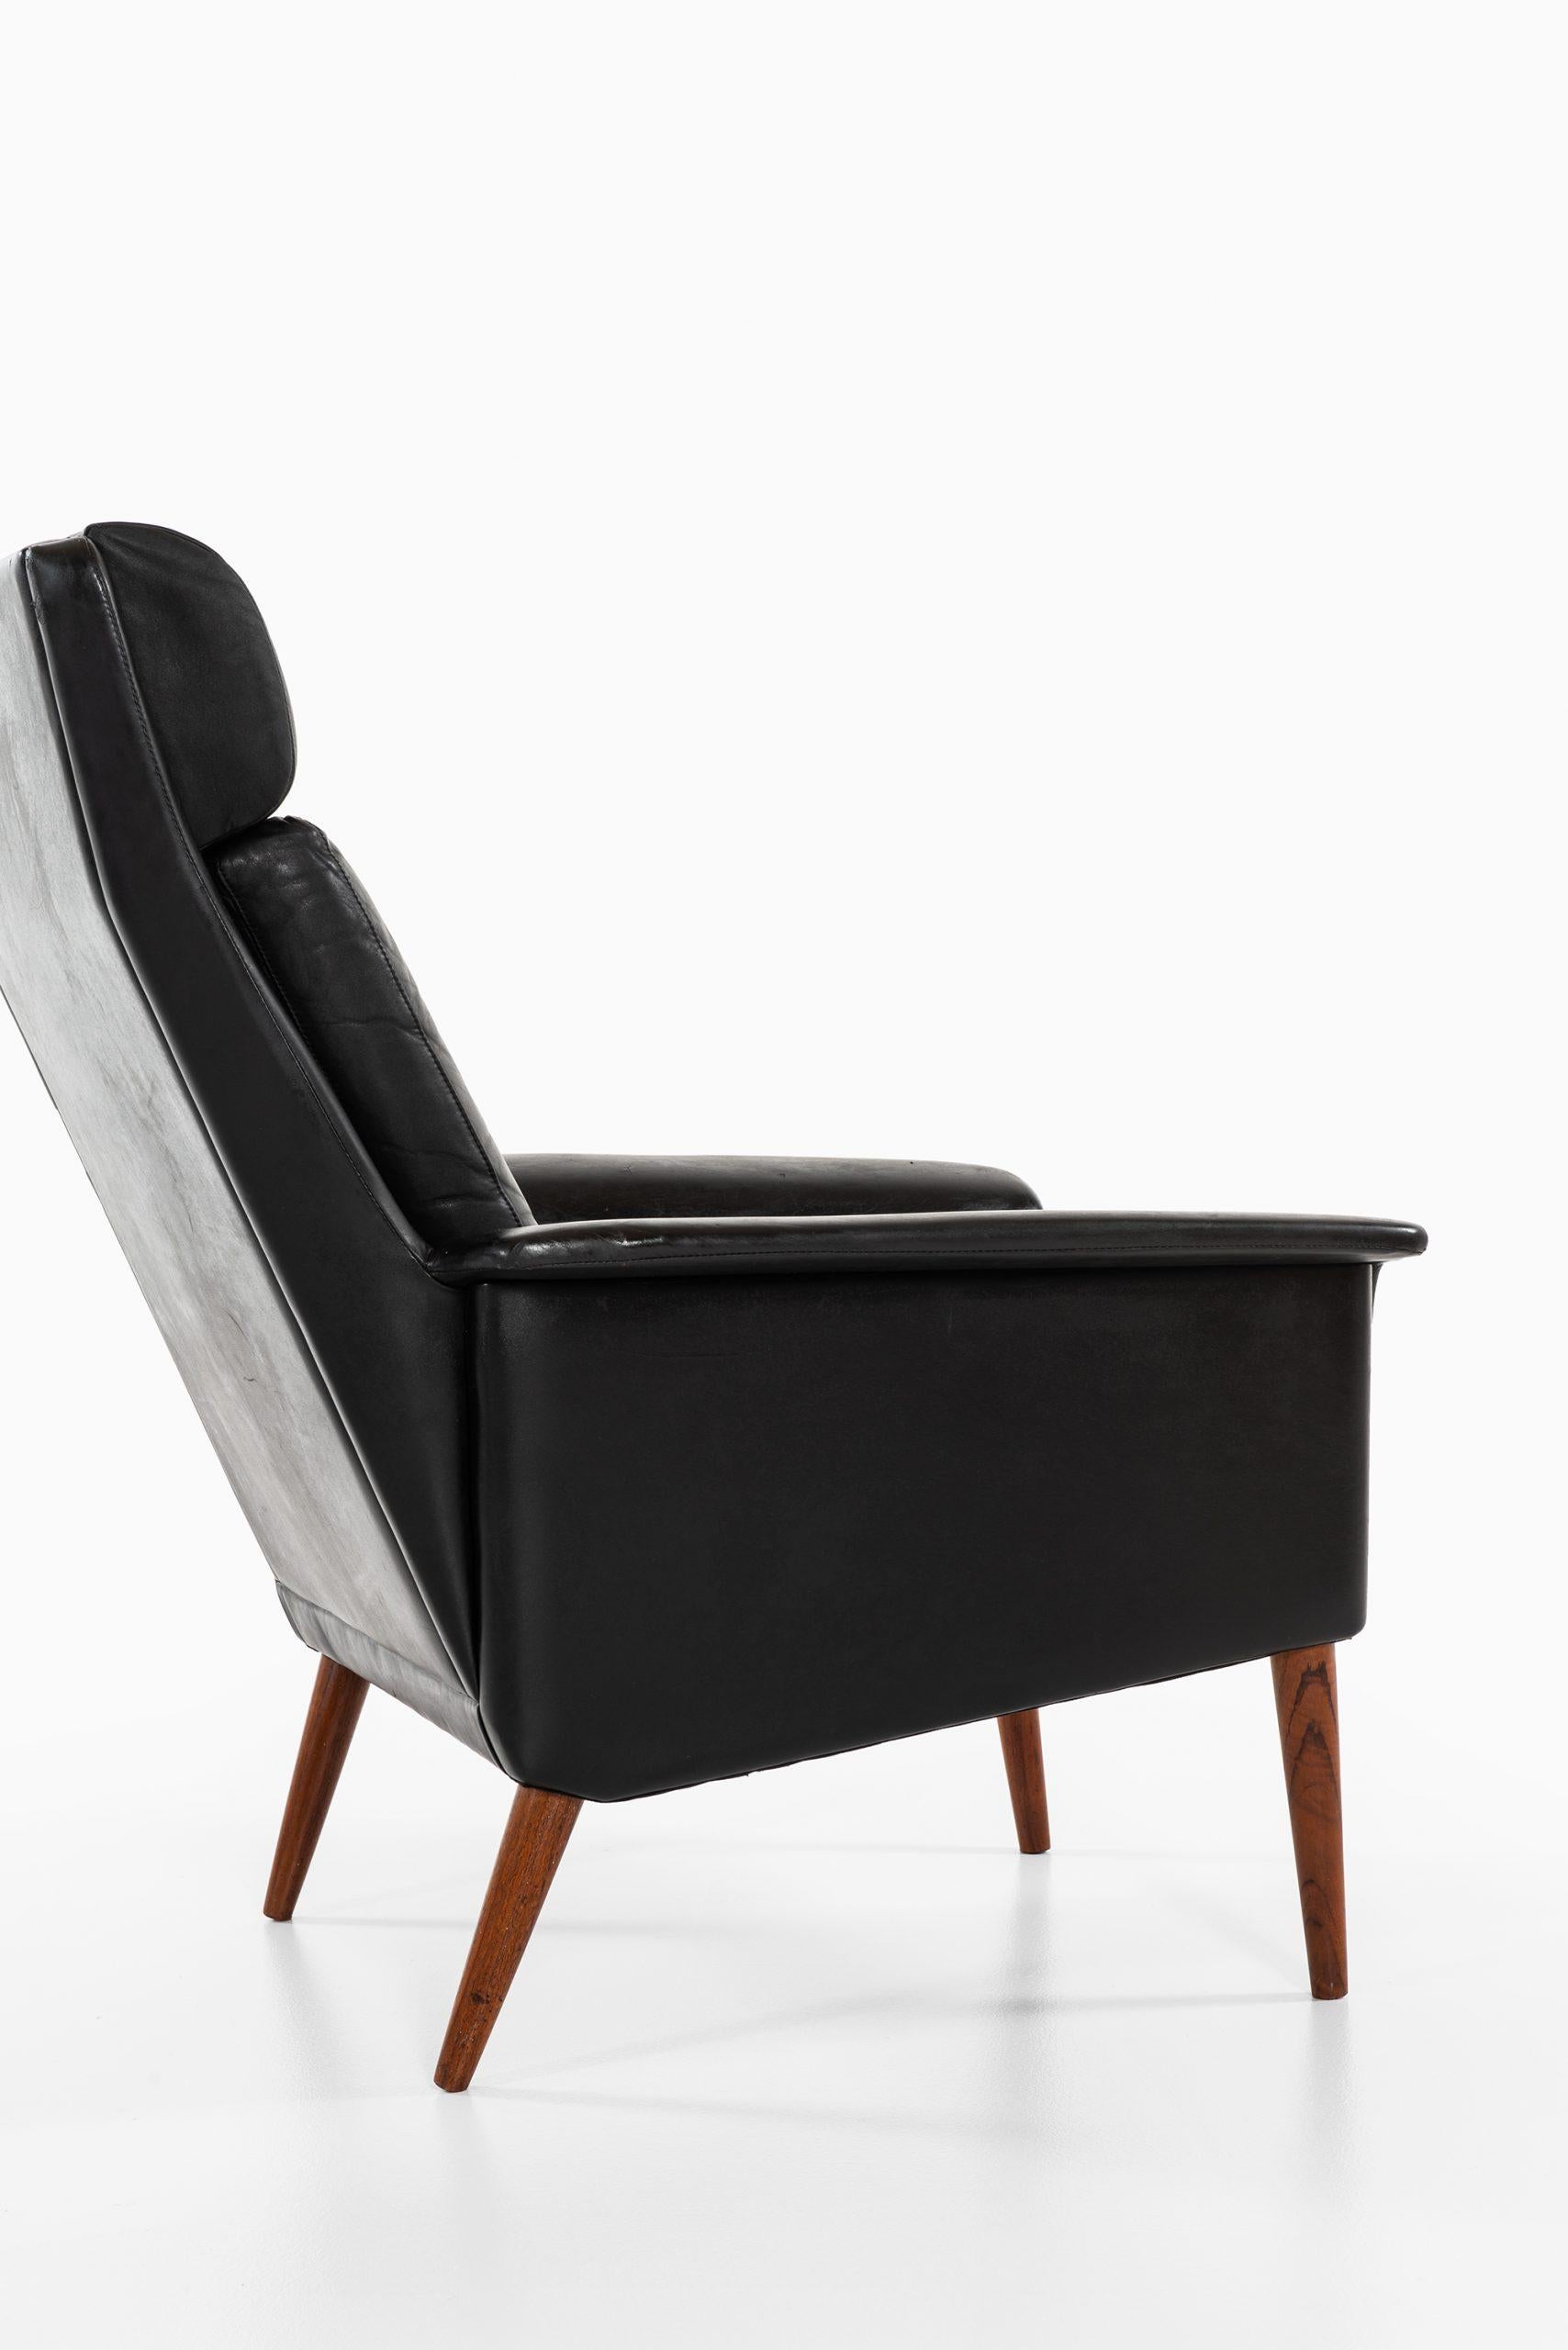 Leather Easy Chairs Produced in Denmark